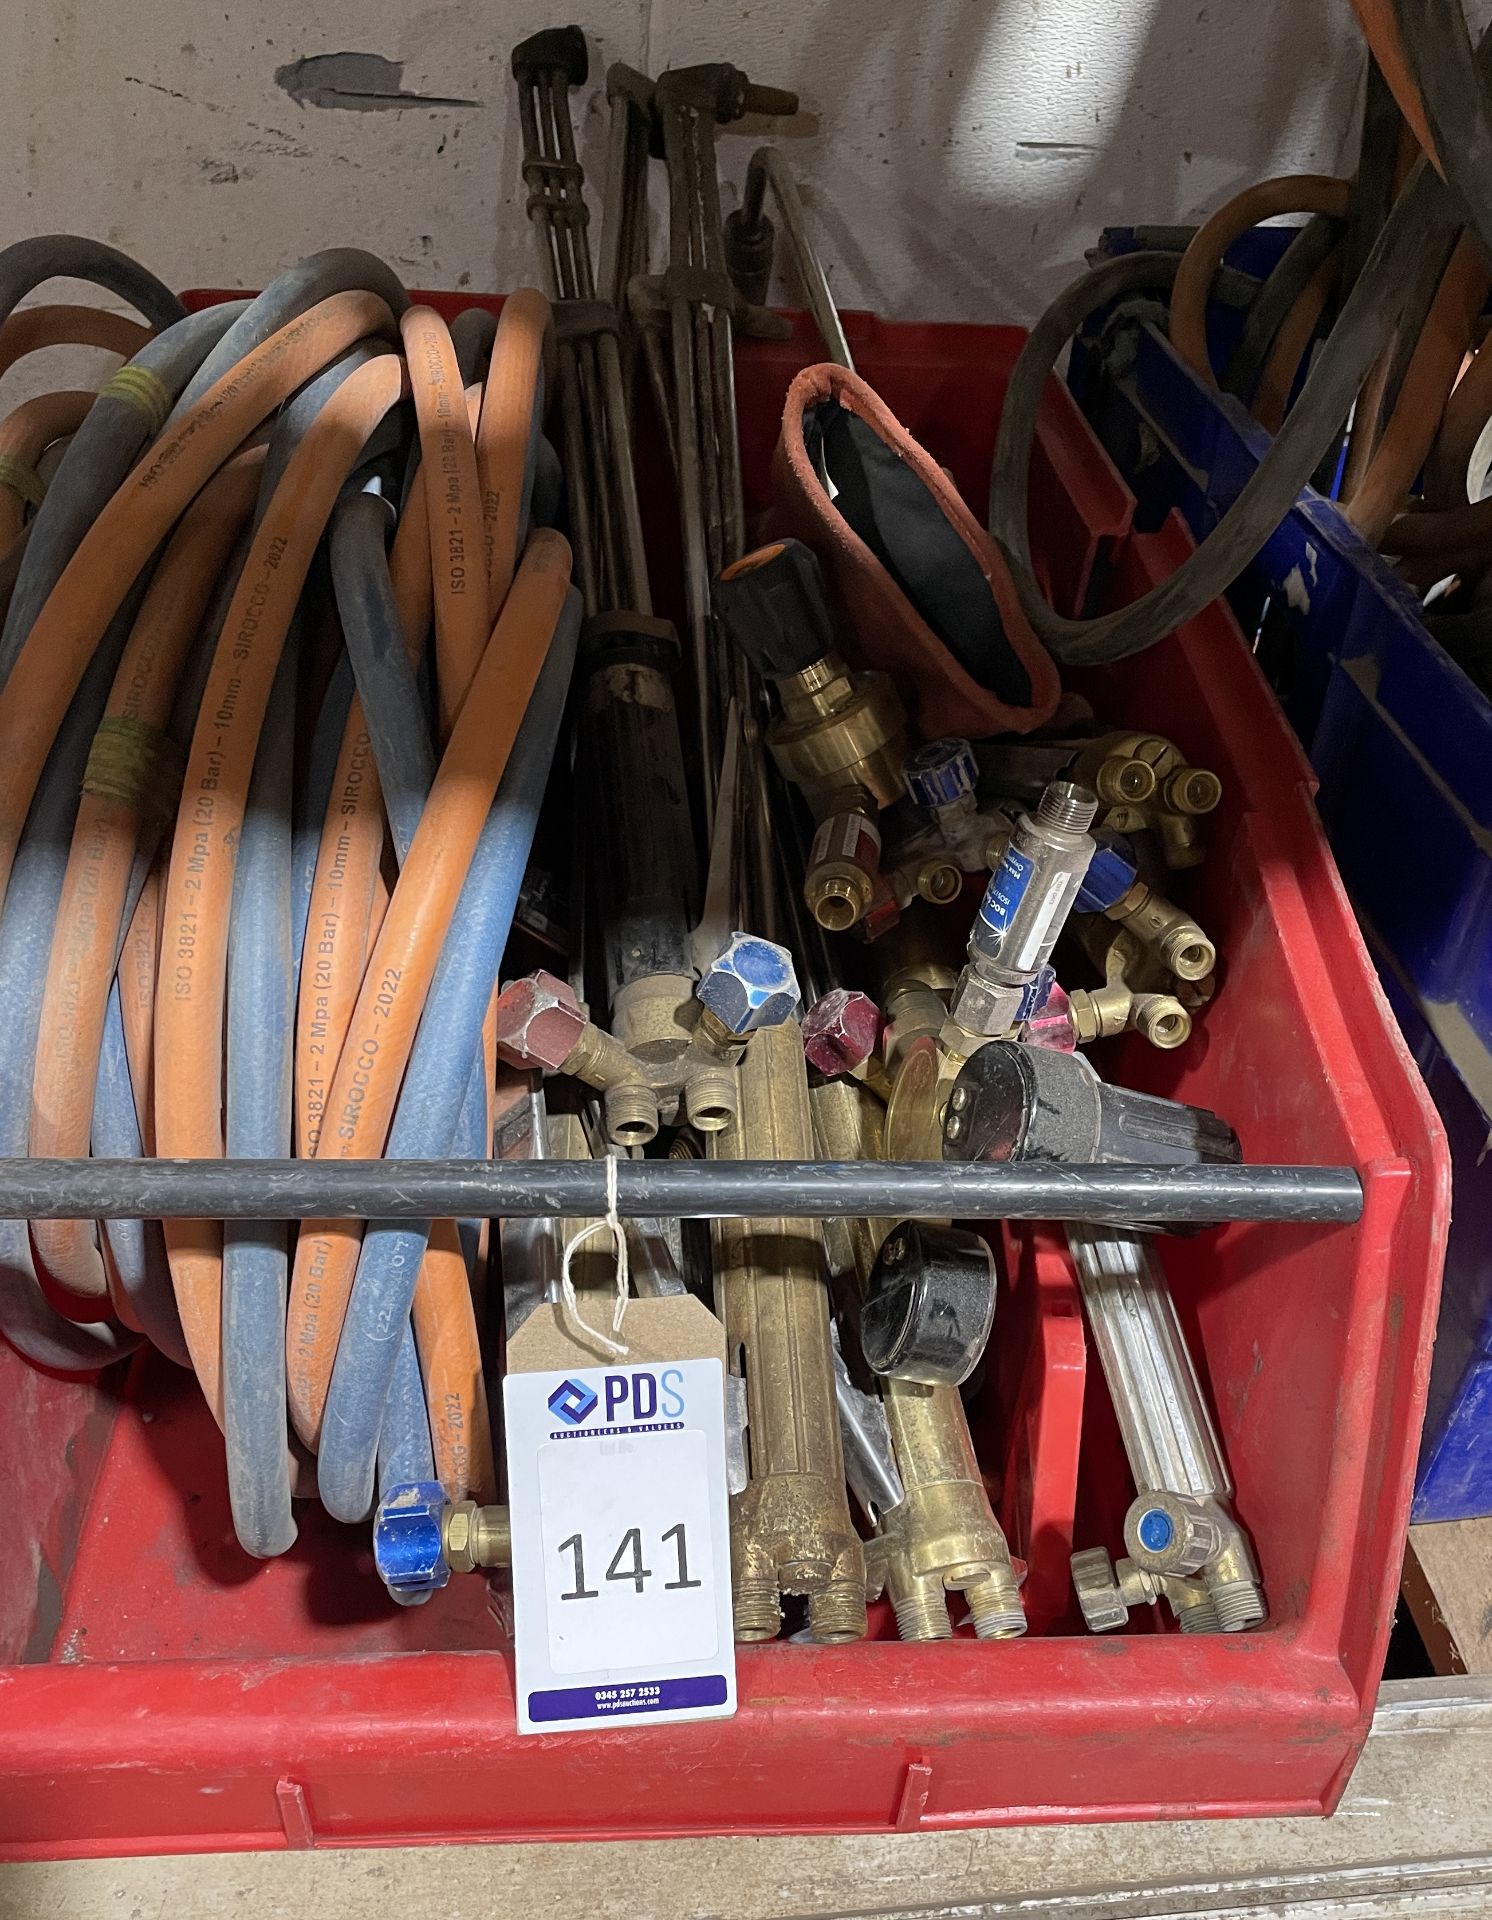 Quantity of Oxy Acetylene Hoses, Gauges & Torches (Location Rochester. Please Refer to General